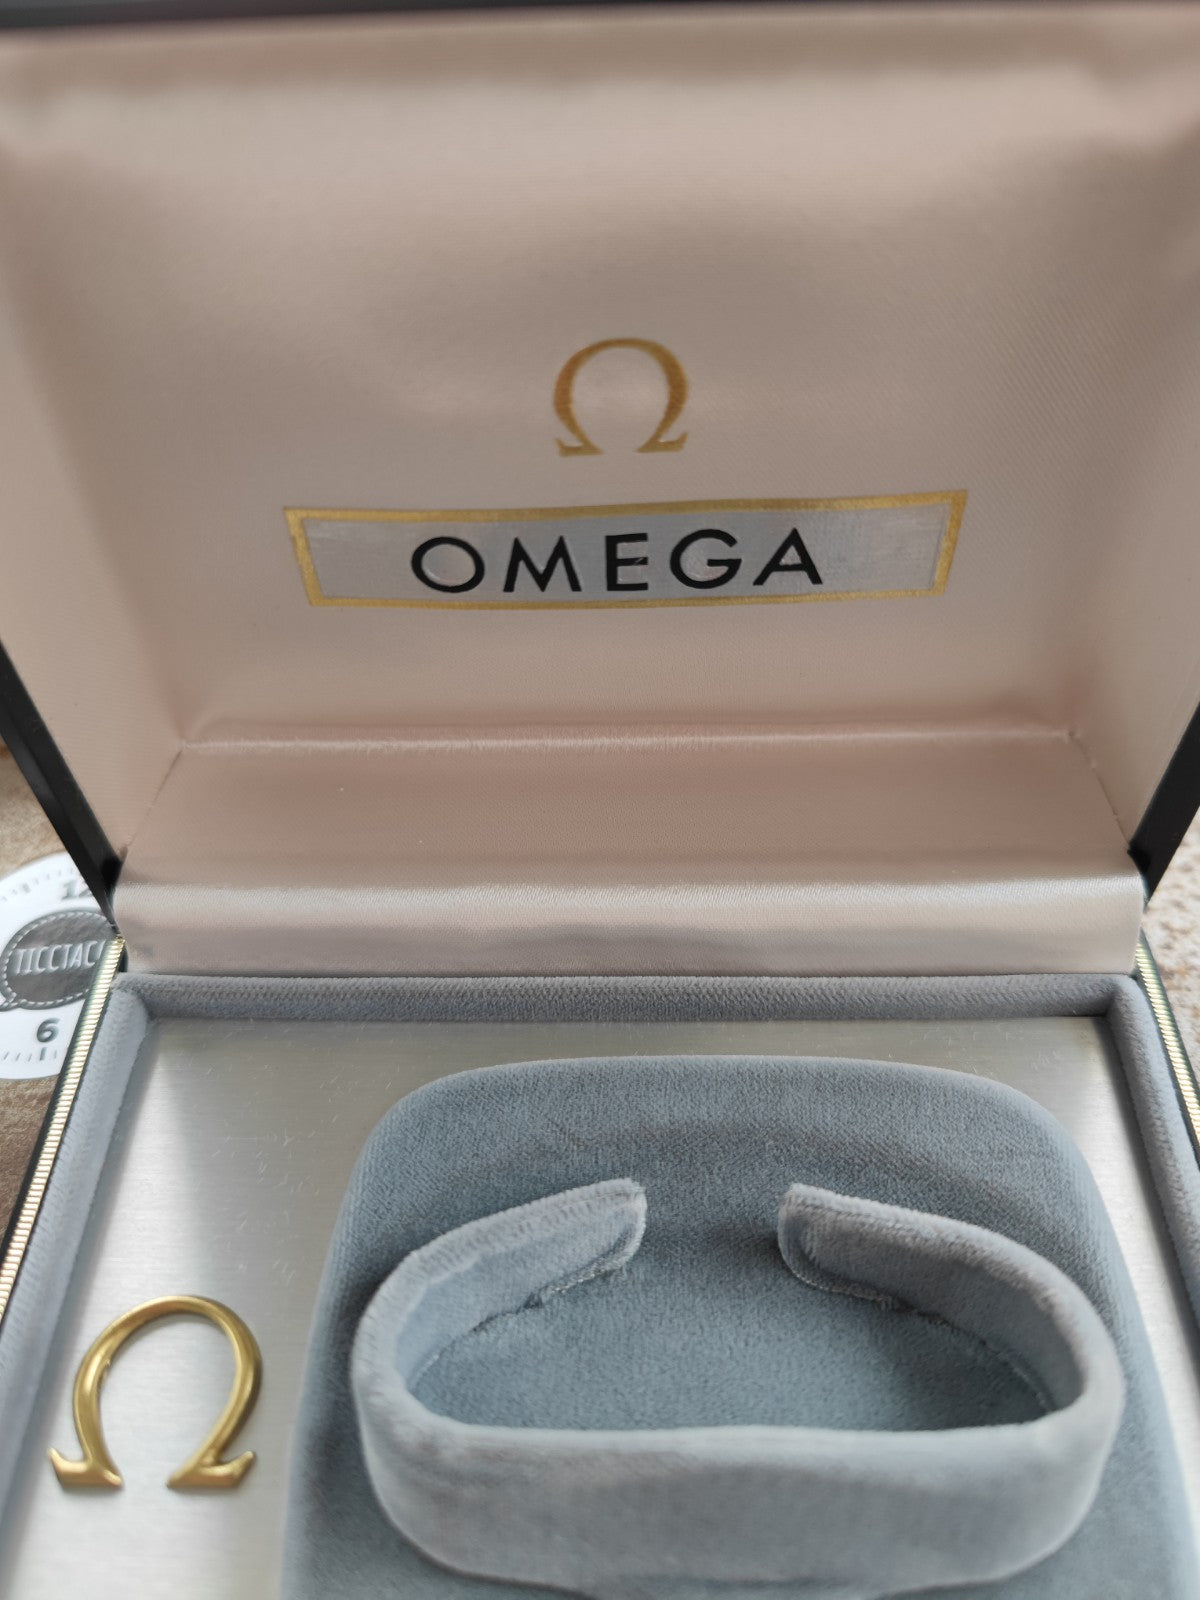 OMEGA box for 60s dress watches